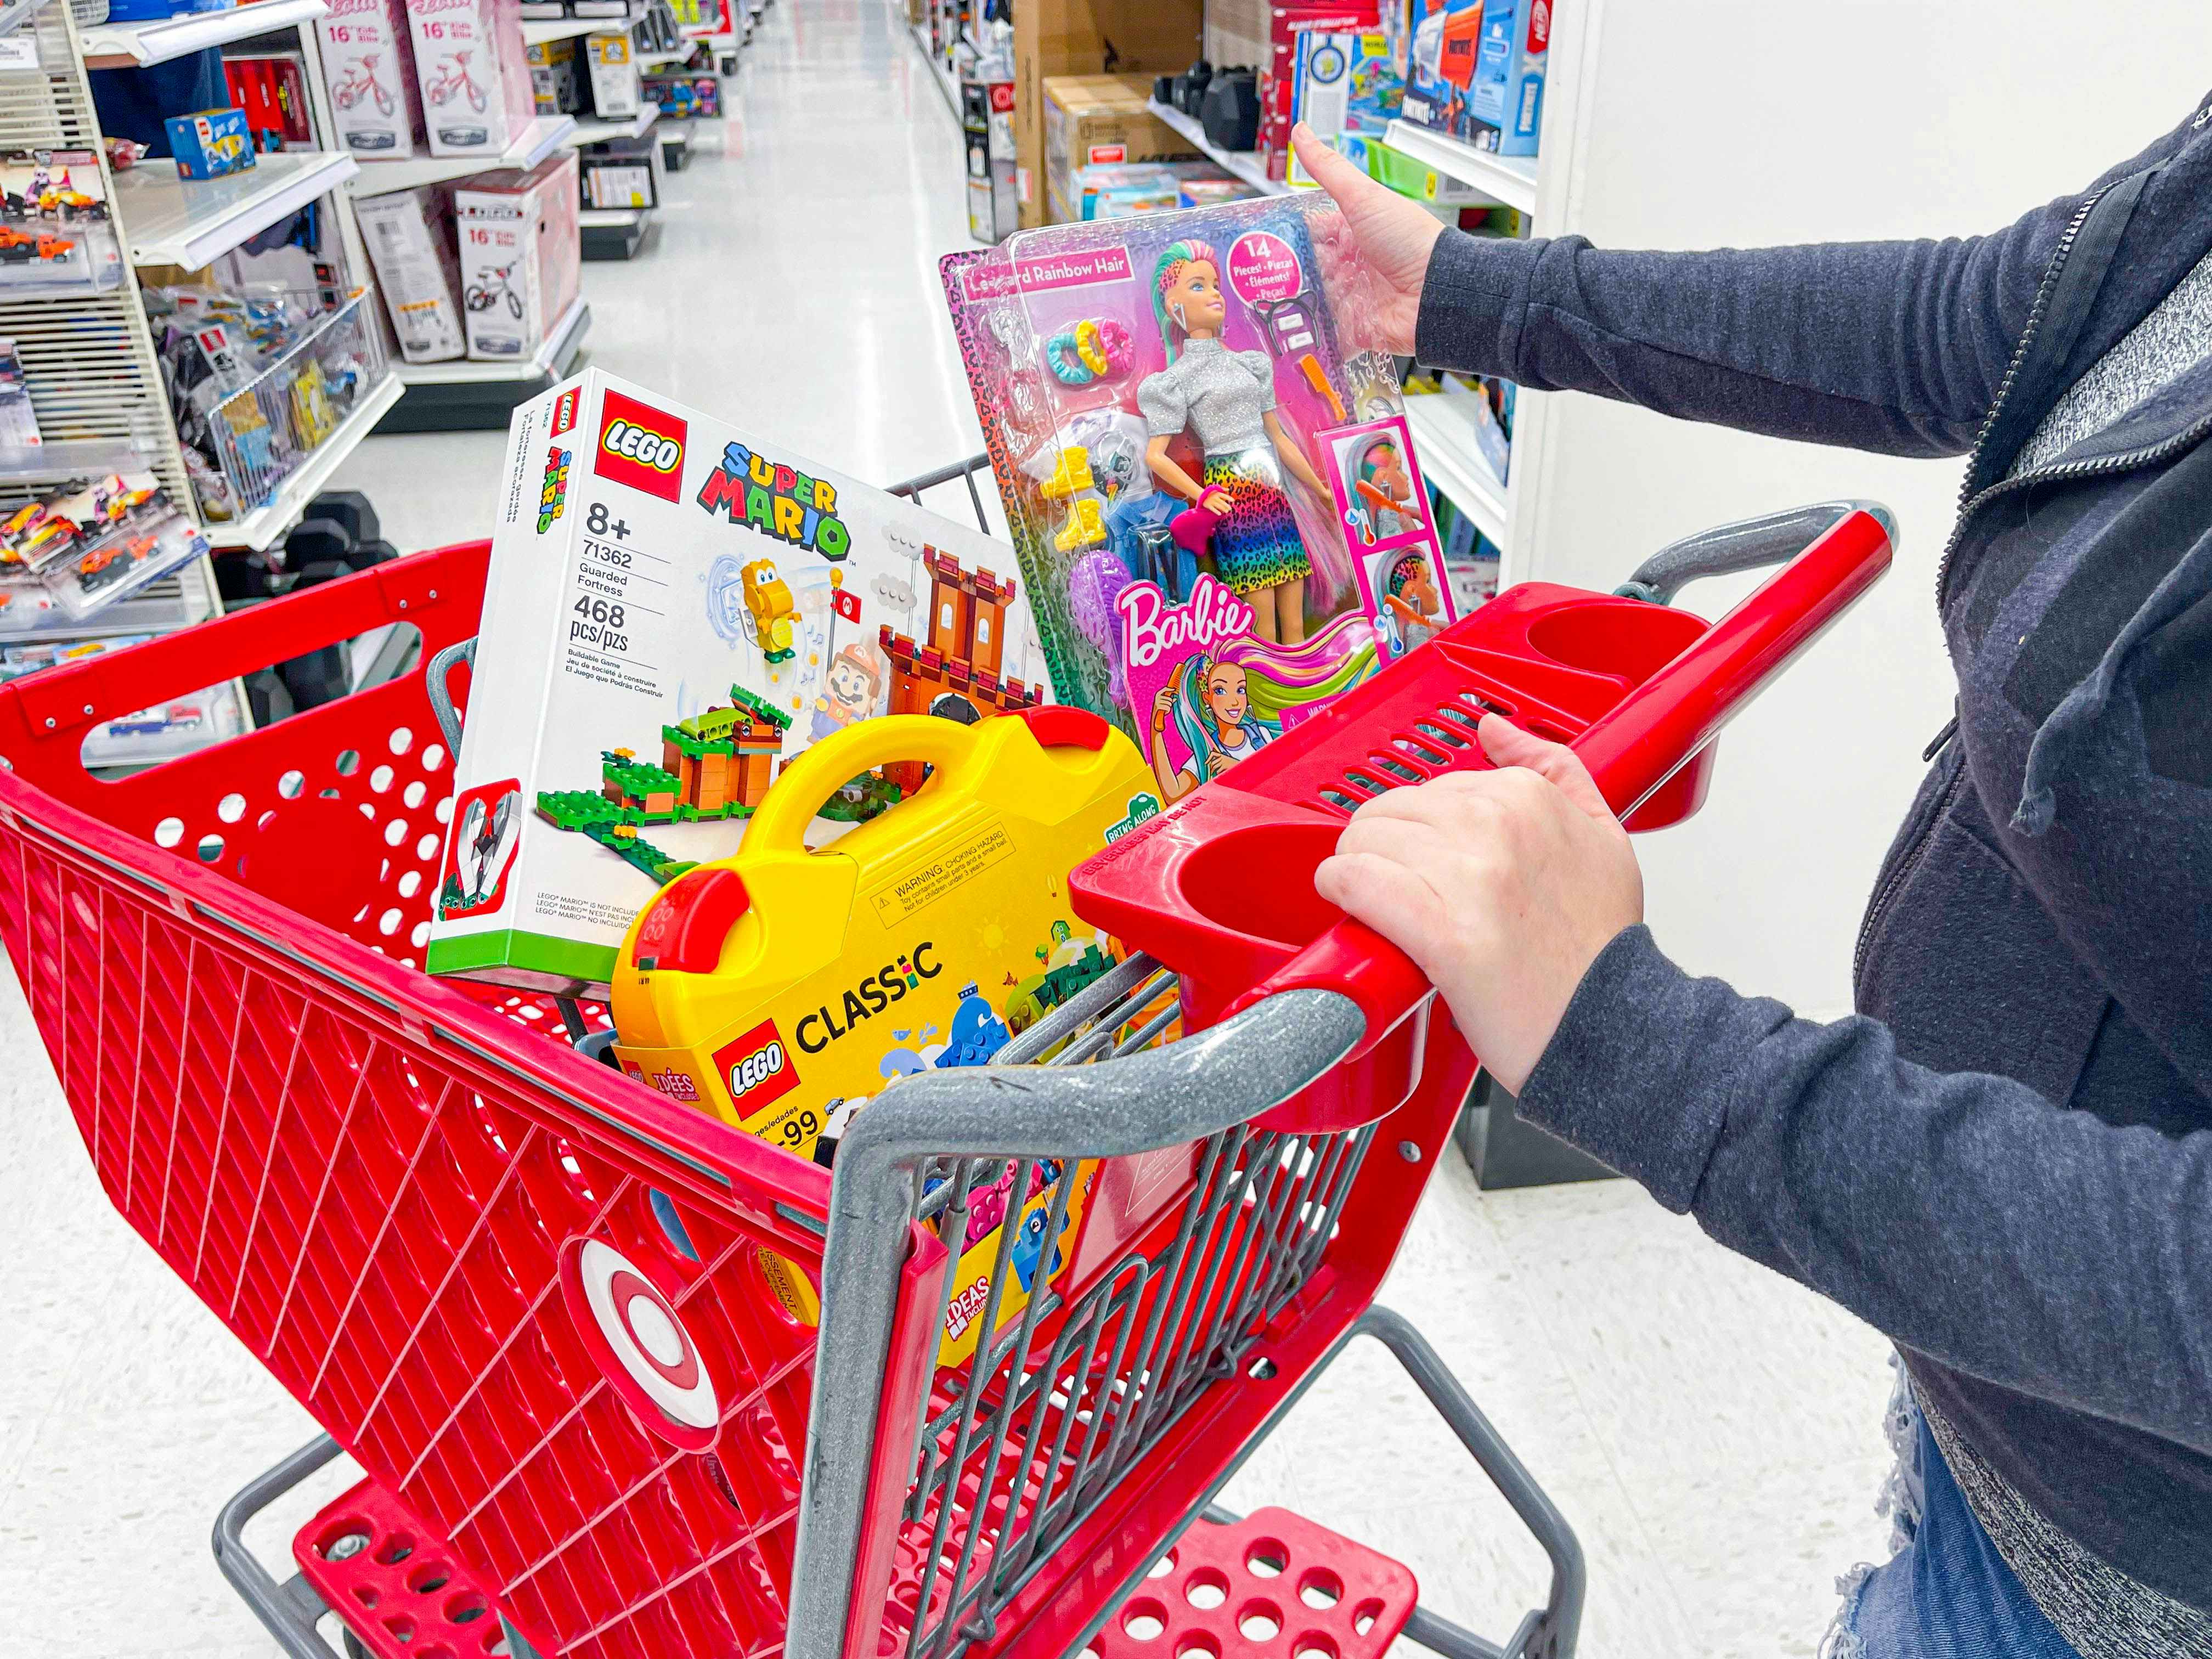 Target Clearance Cheat Sheet: Get the Most by Spending the Least